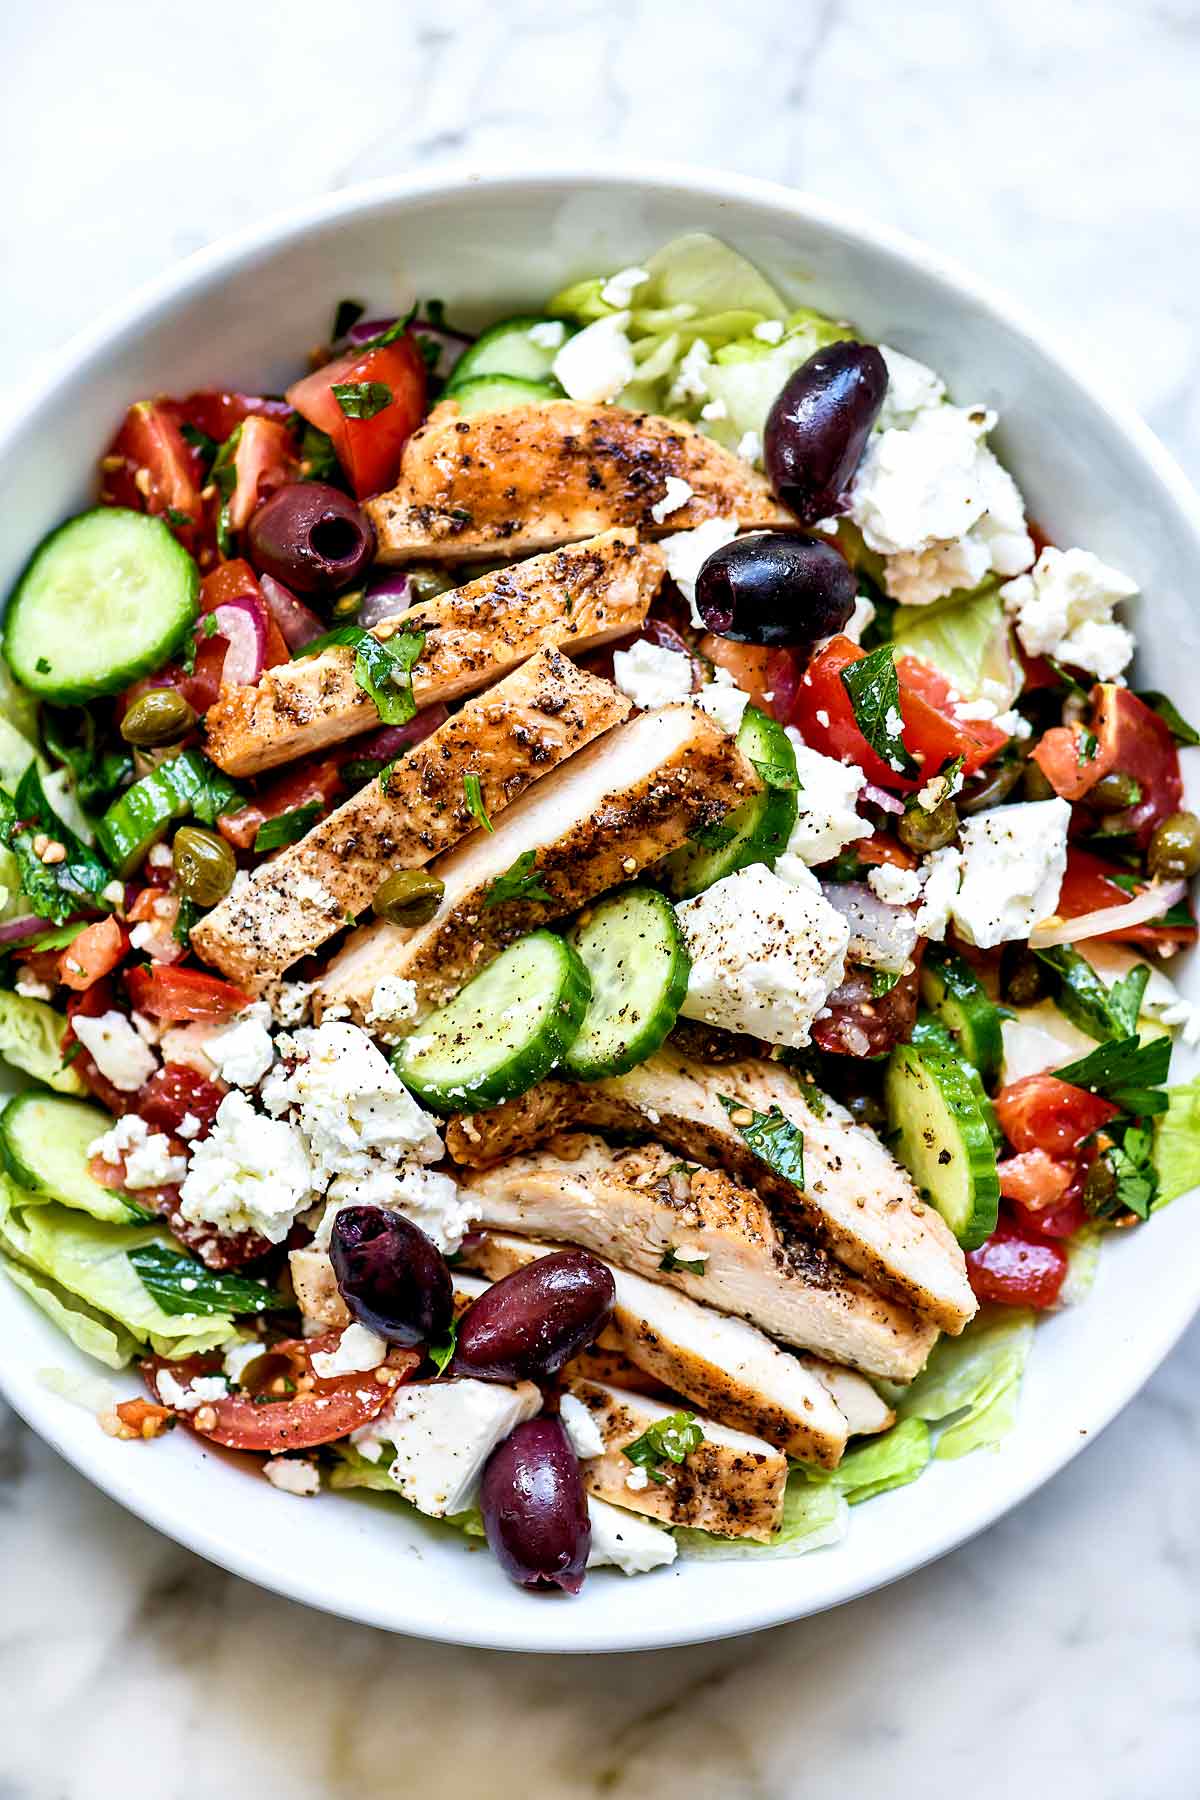 31 Healthy Salad Recipes with Chicken That Taste Amazing